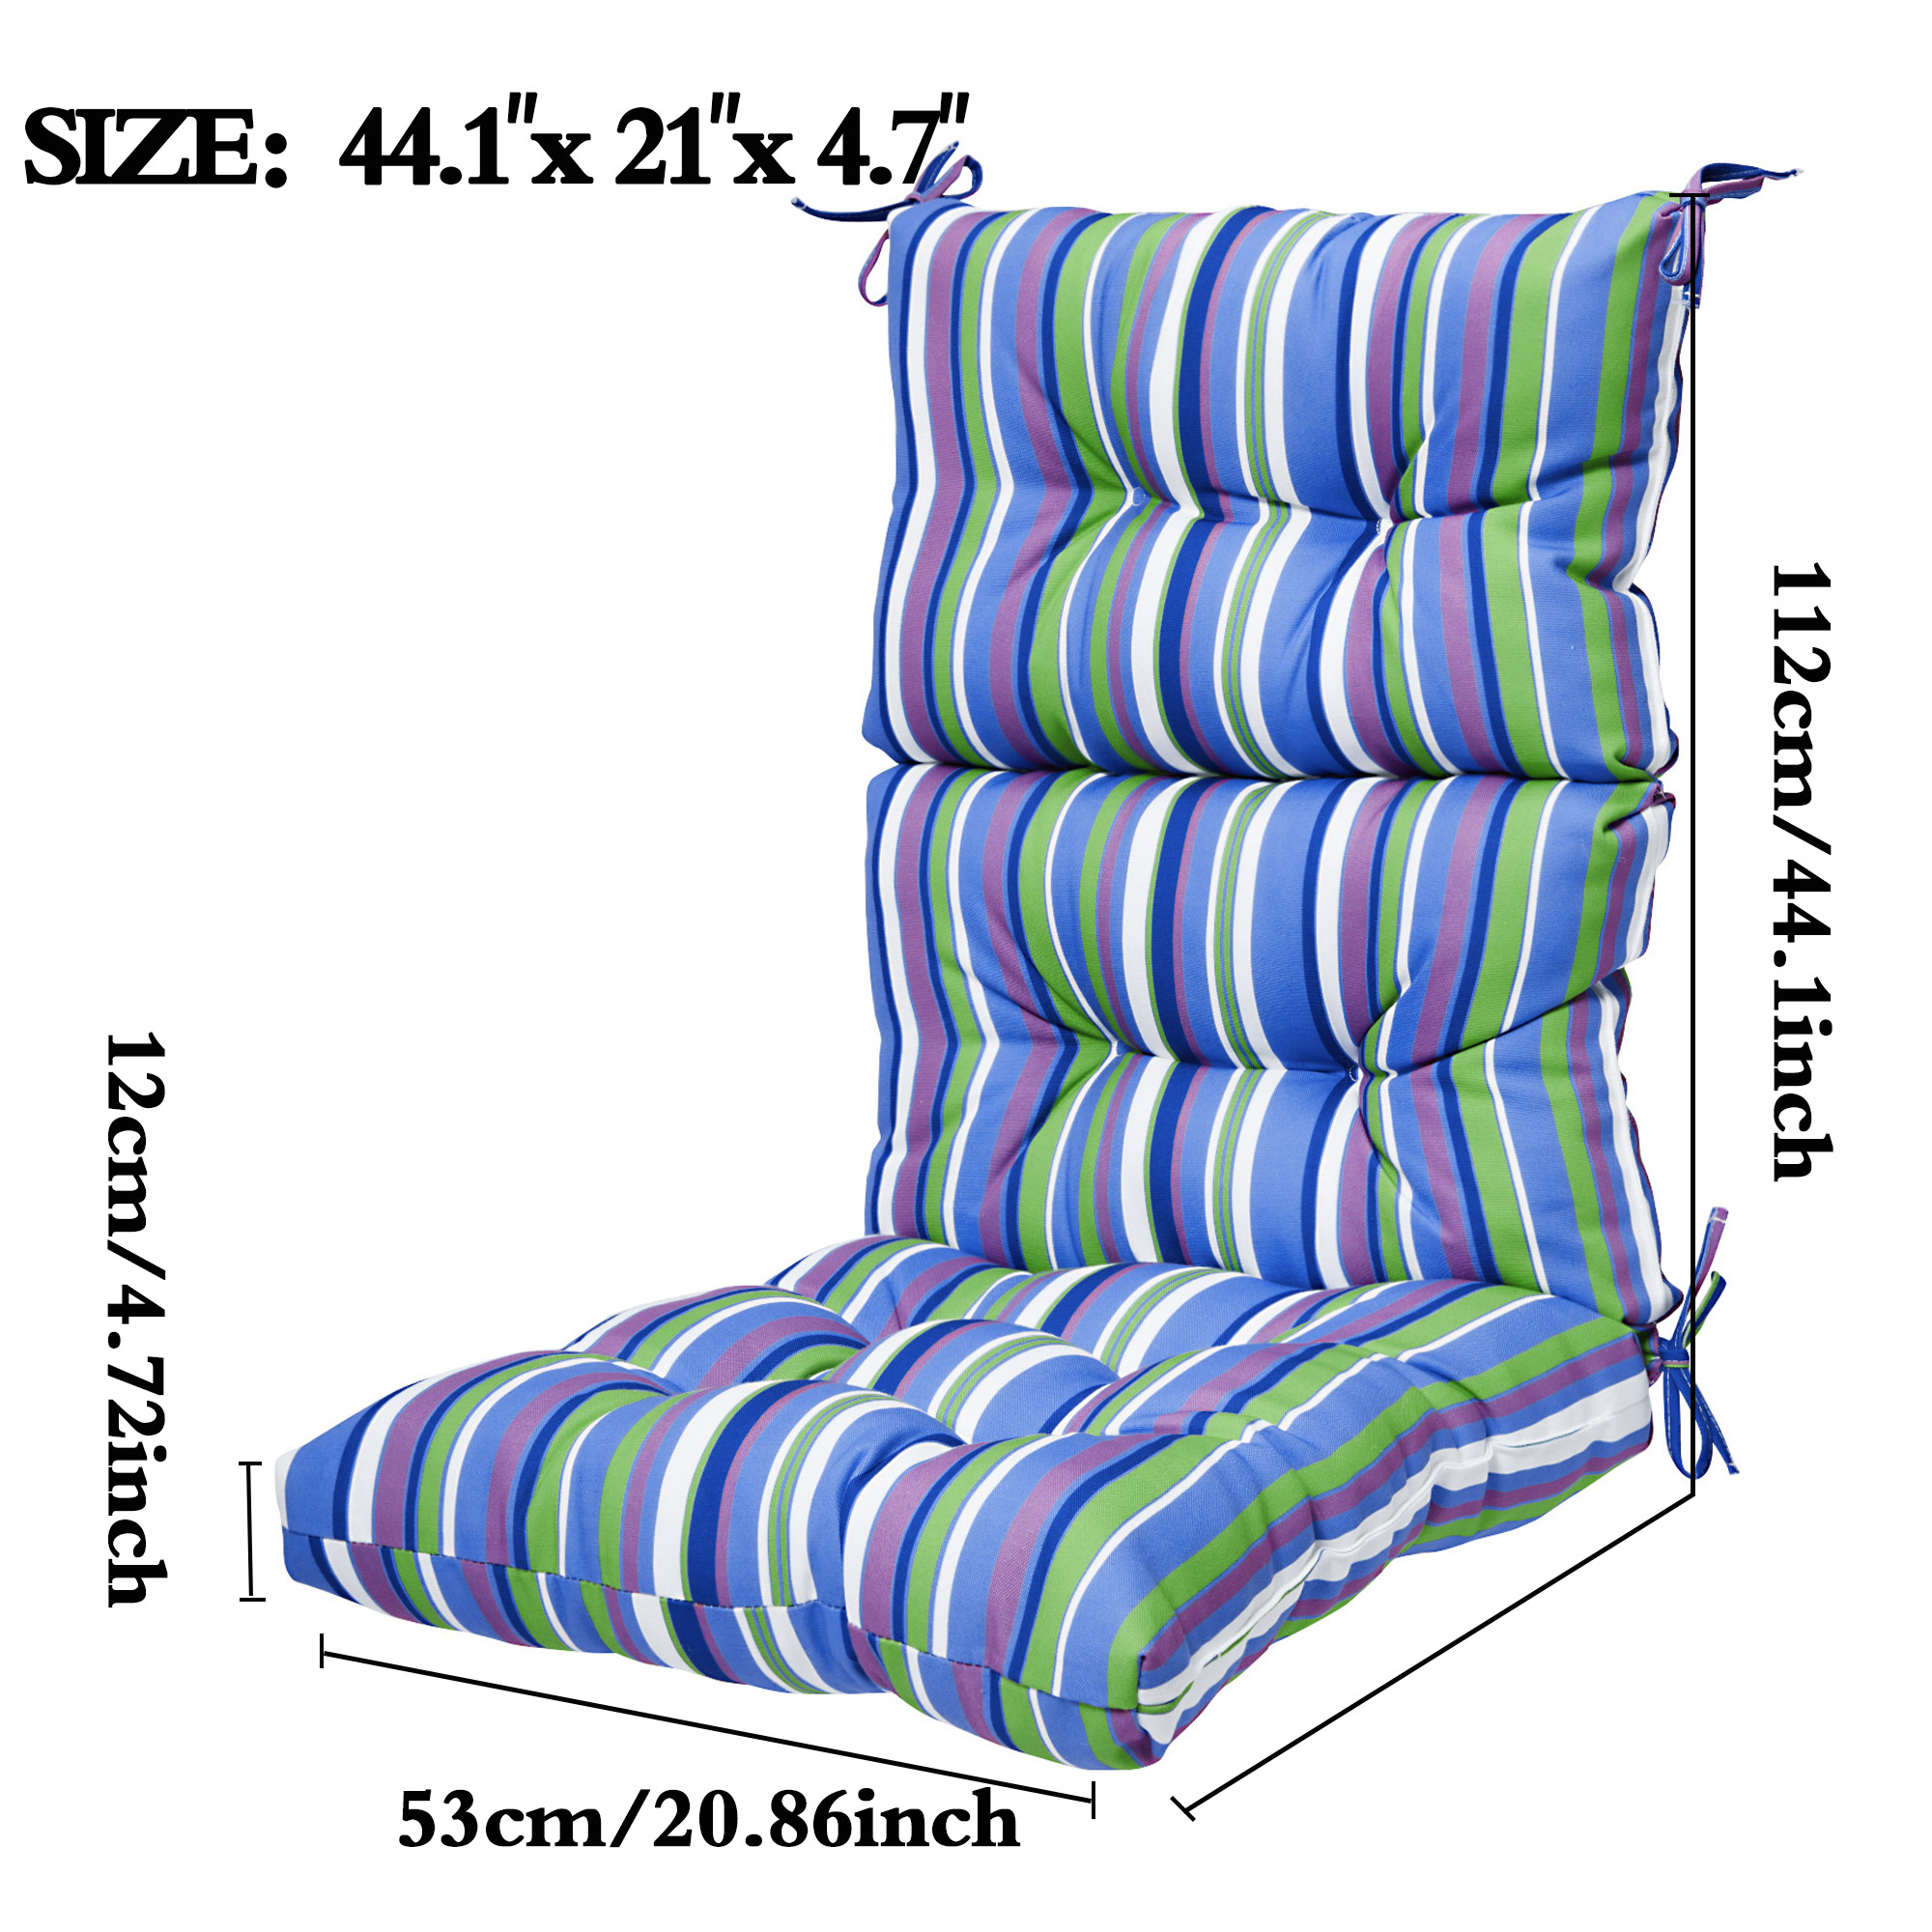 LELINTA 4 Pcs 44Inch Patio Chaise Lounger Cushion for Rocking Chair, Indoor/Outdoor Lounger Cushions Rocking Chair Pads Sofa Cushion - Thick Padded Seat Cushion Swing Seat Sets Cushion s with Ties - image 2 of 7